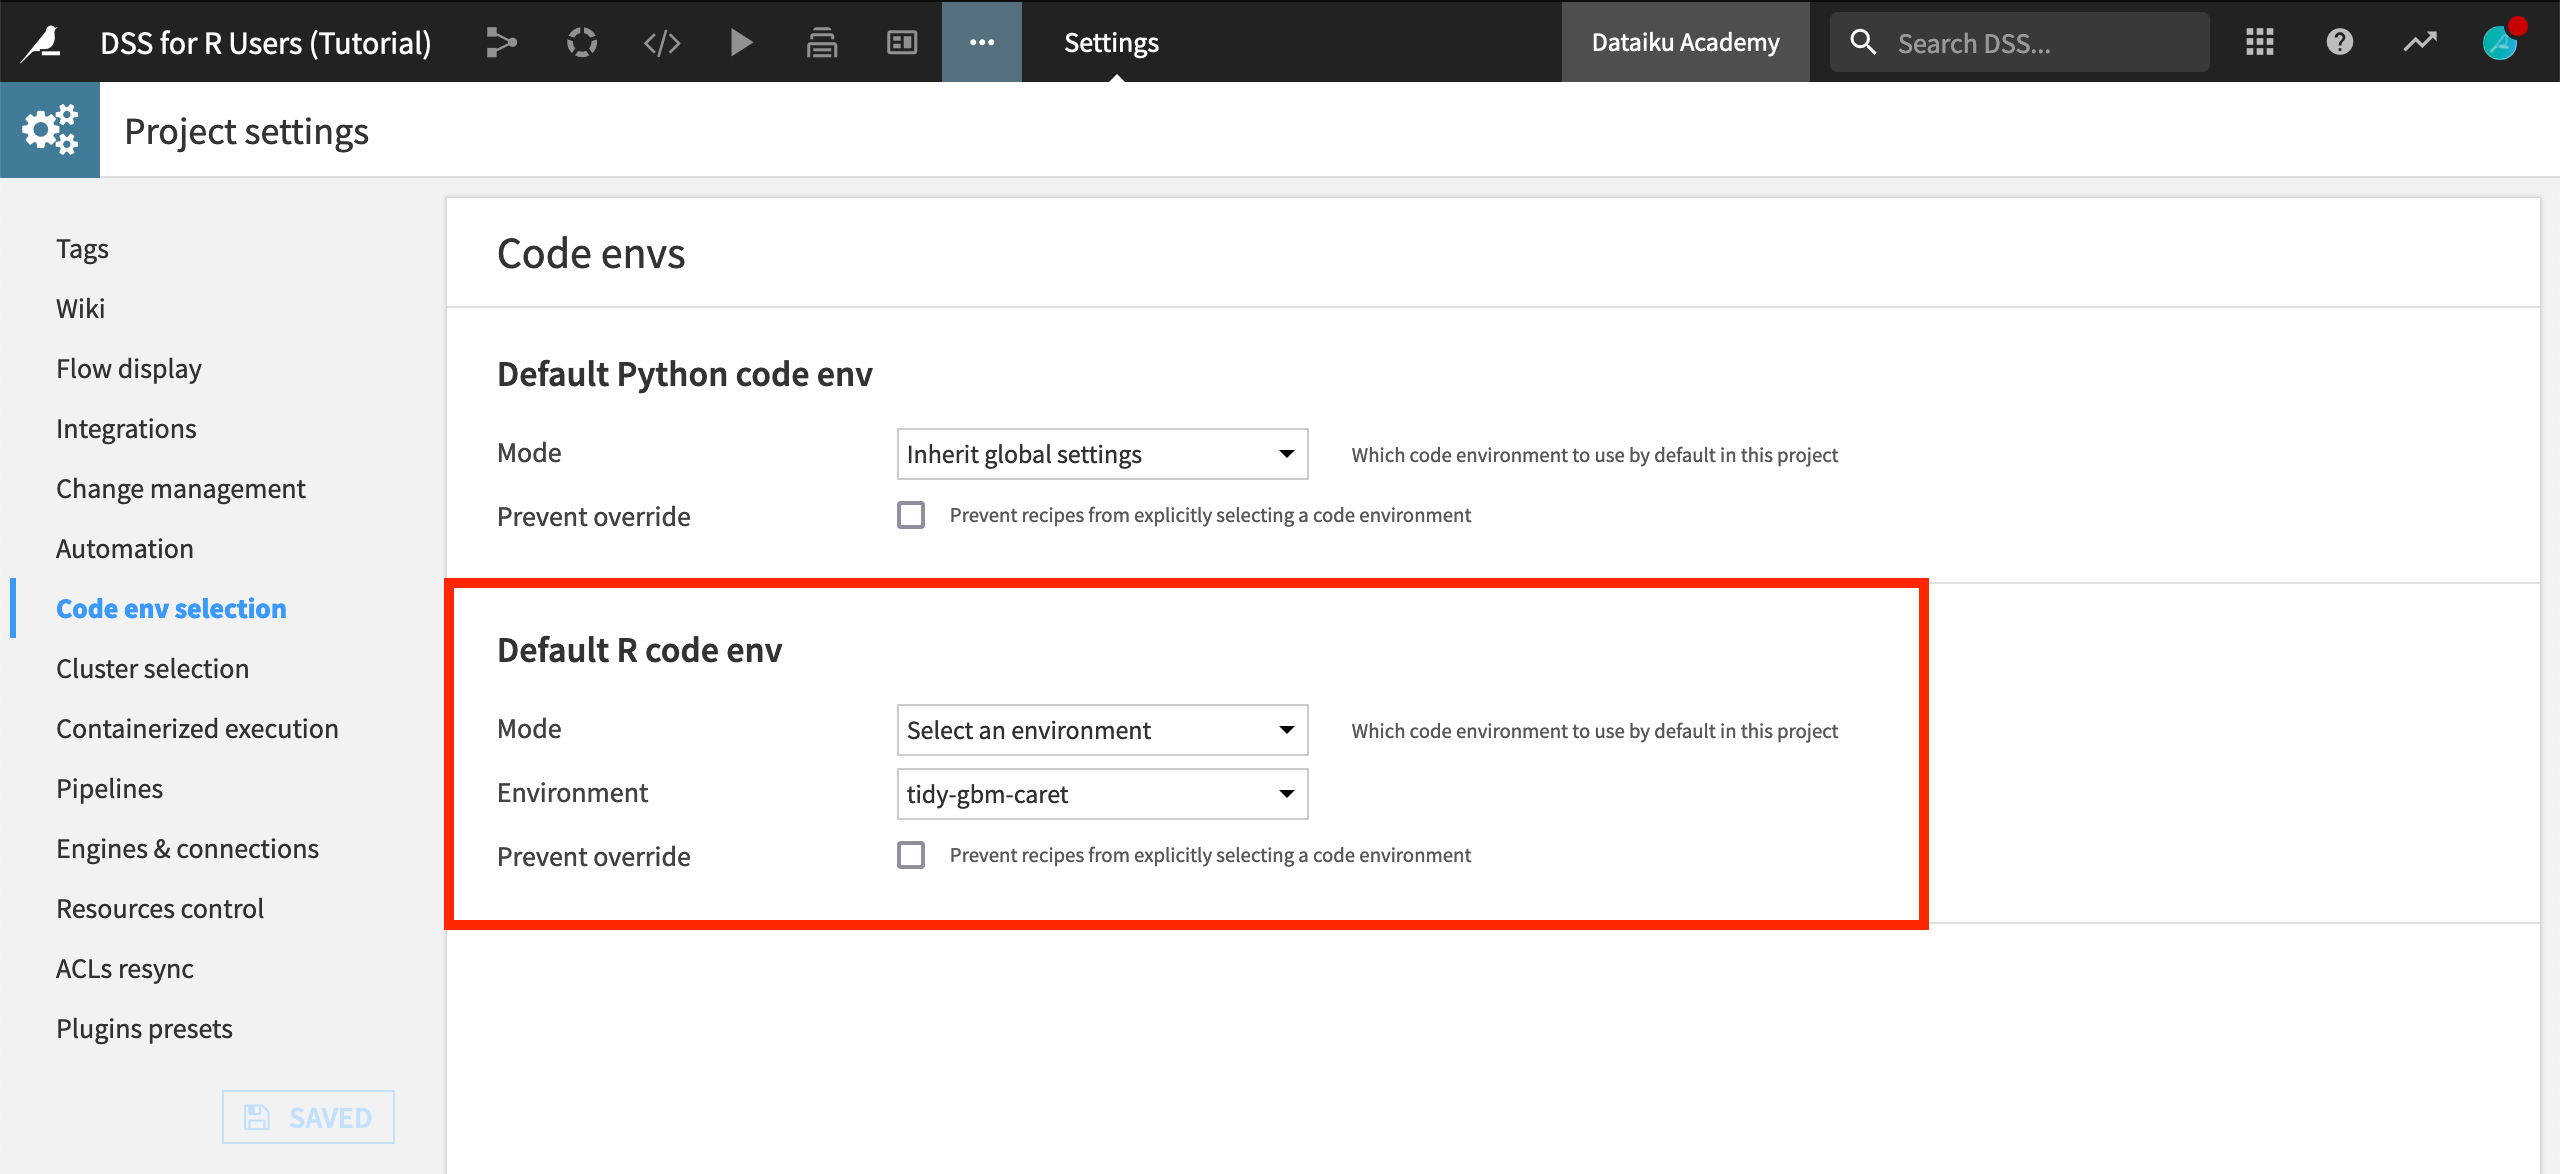 Code environment selection page under settings showing a custom R code environment selected as the default environment